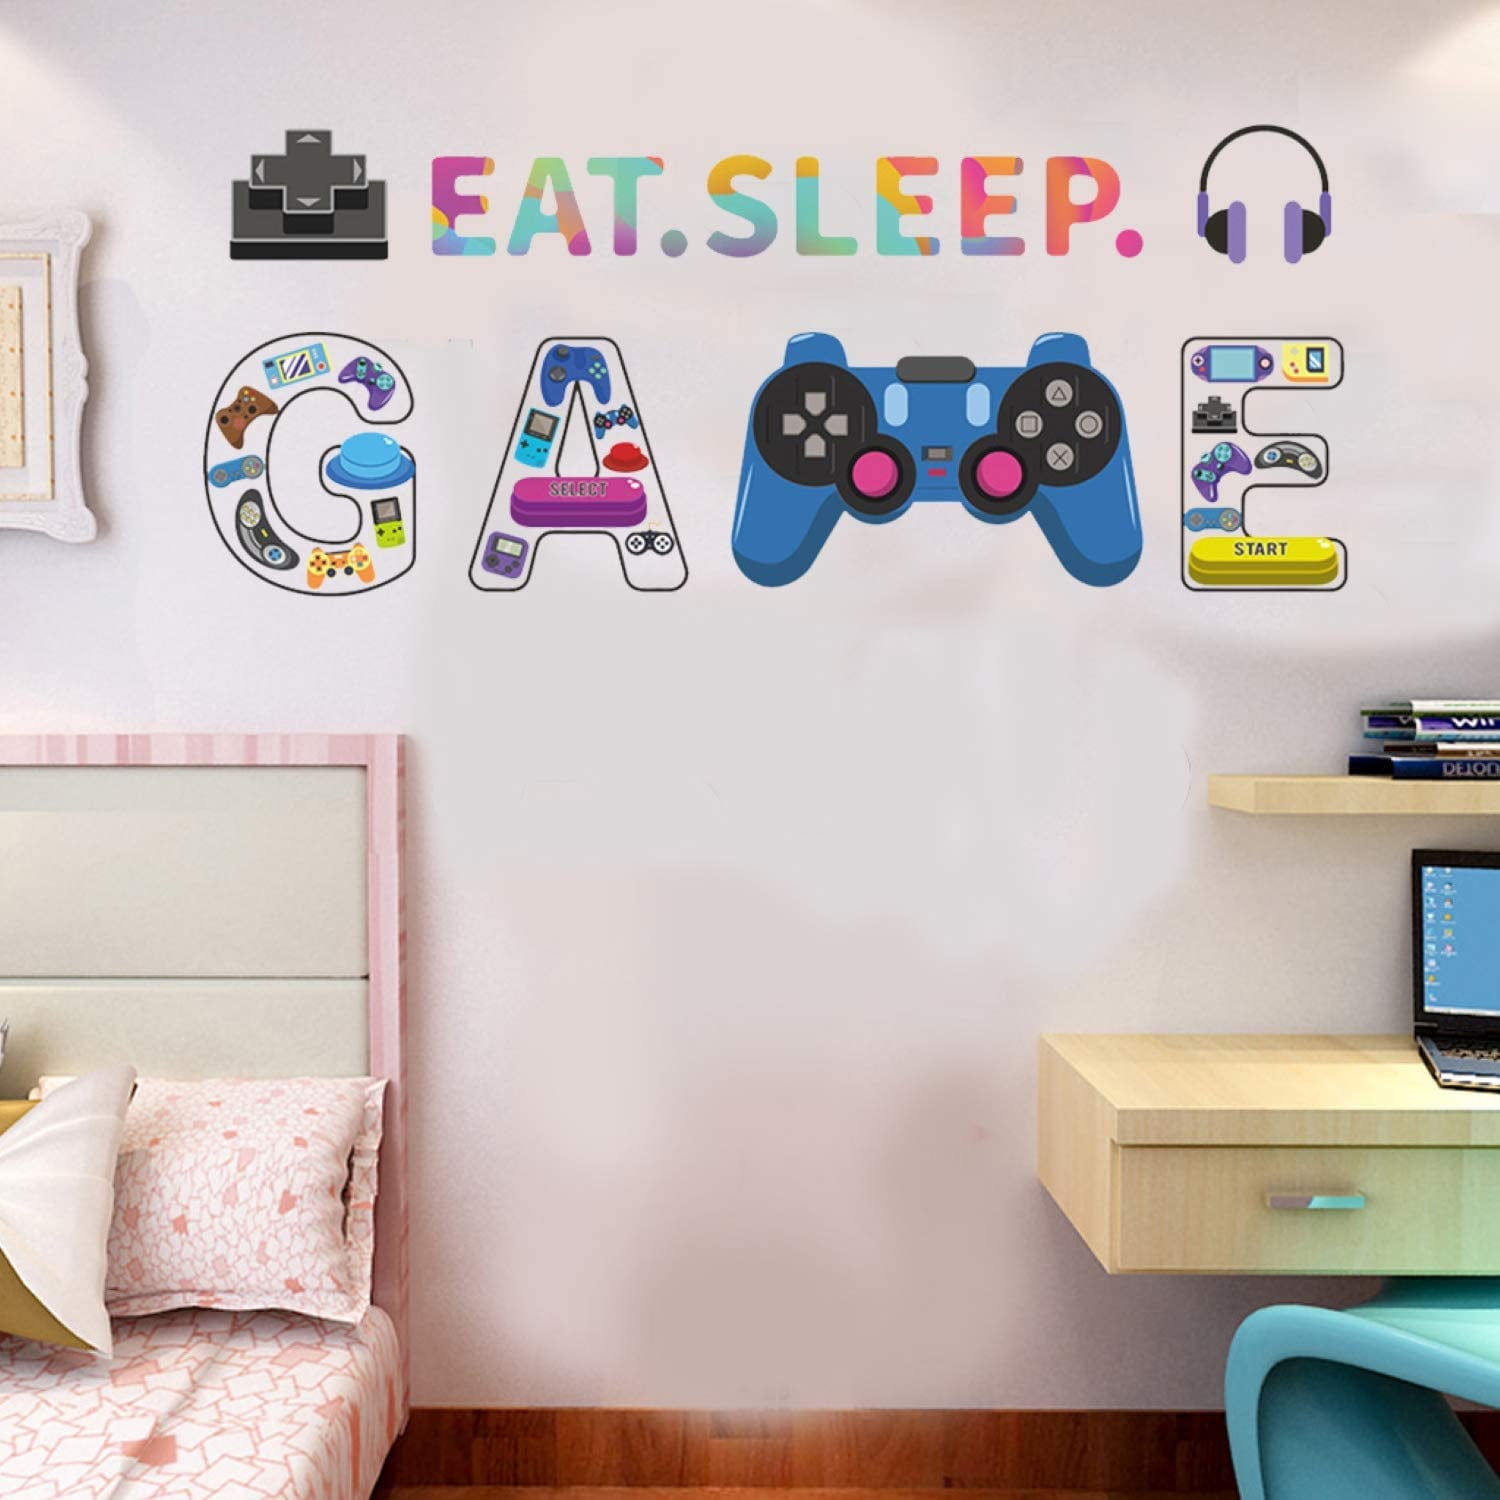 Gamer with Controller and Eat Sleep Game Wall Decal Cool Image Vinyl Stickers Set of 2 Removable Gamer Gamepad Art DIY Quote Sticker Mural for Kids Room Playroom Bedroom Livingroom Home Decoration